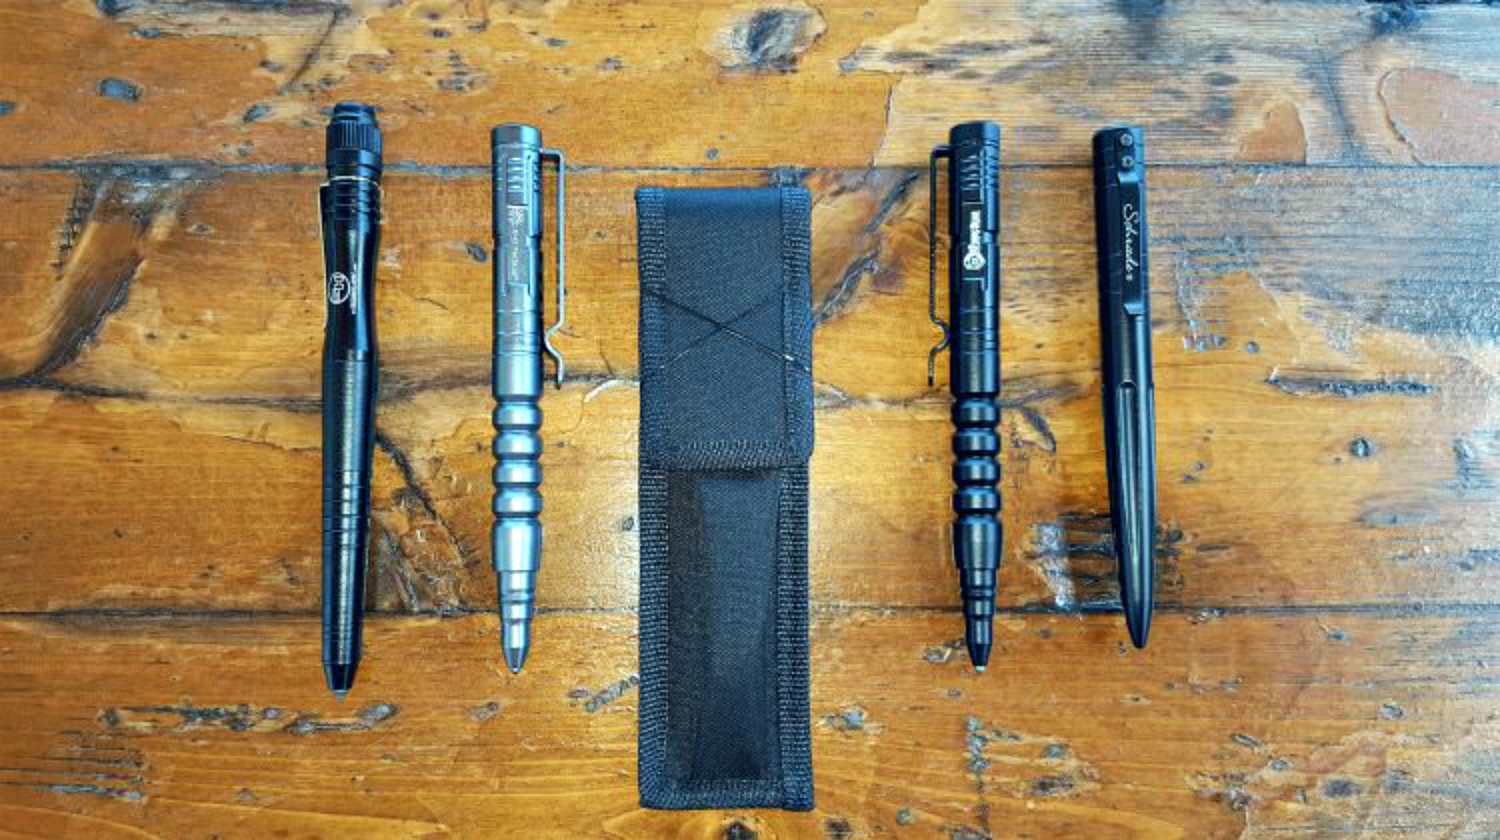 Feature | Different types of tactical pen on wooden table | Tactical Pens: They “Ain't” Just For Writing